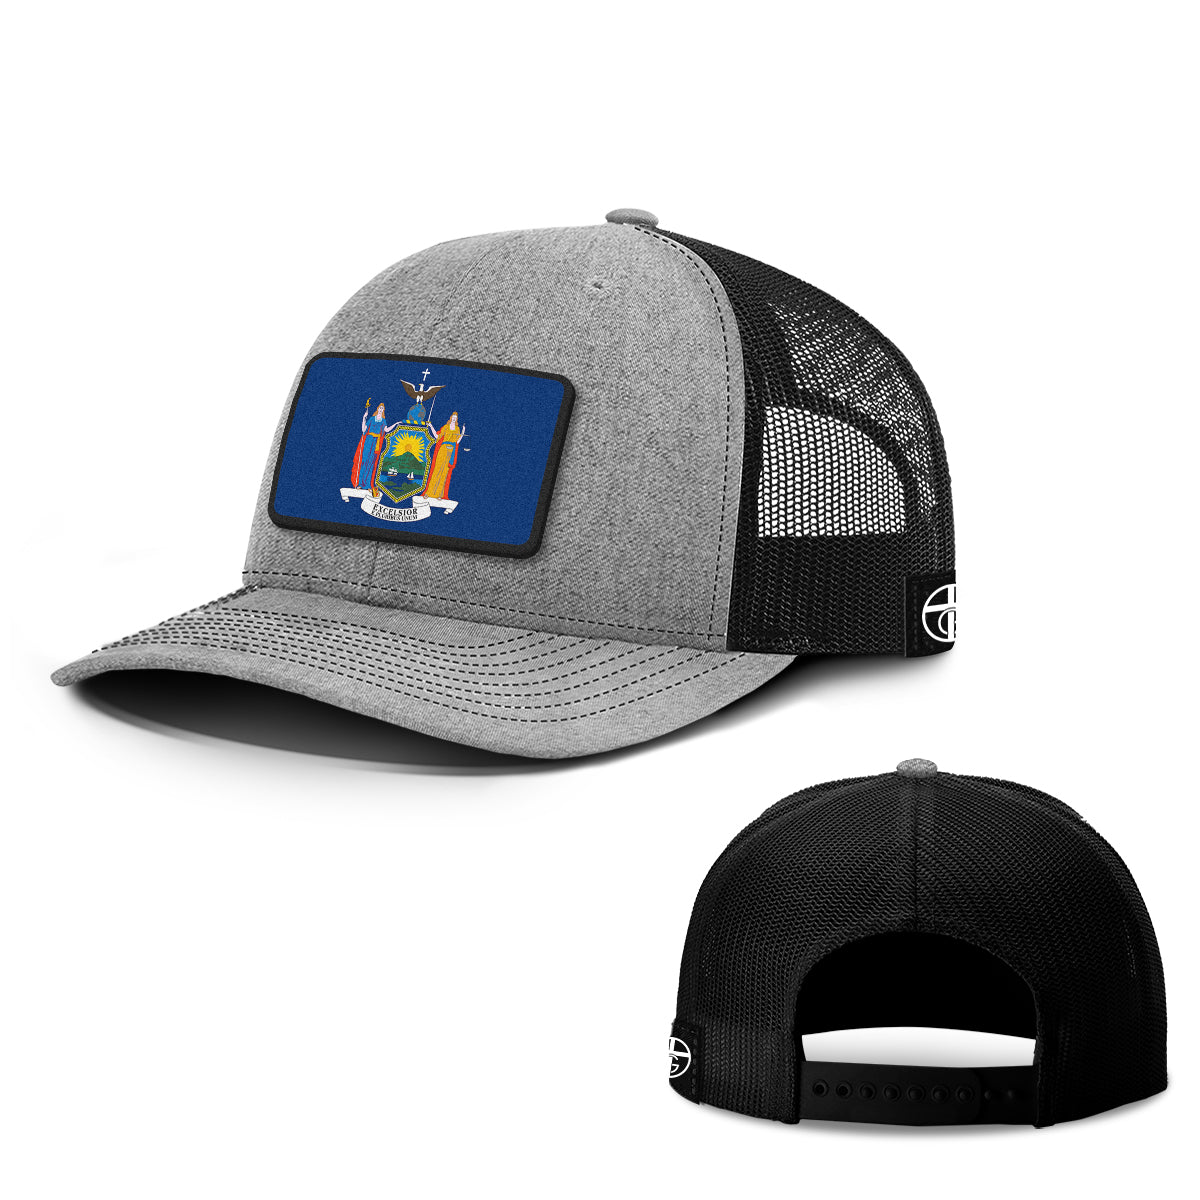 New York is God’s Country Patch Hats